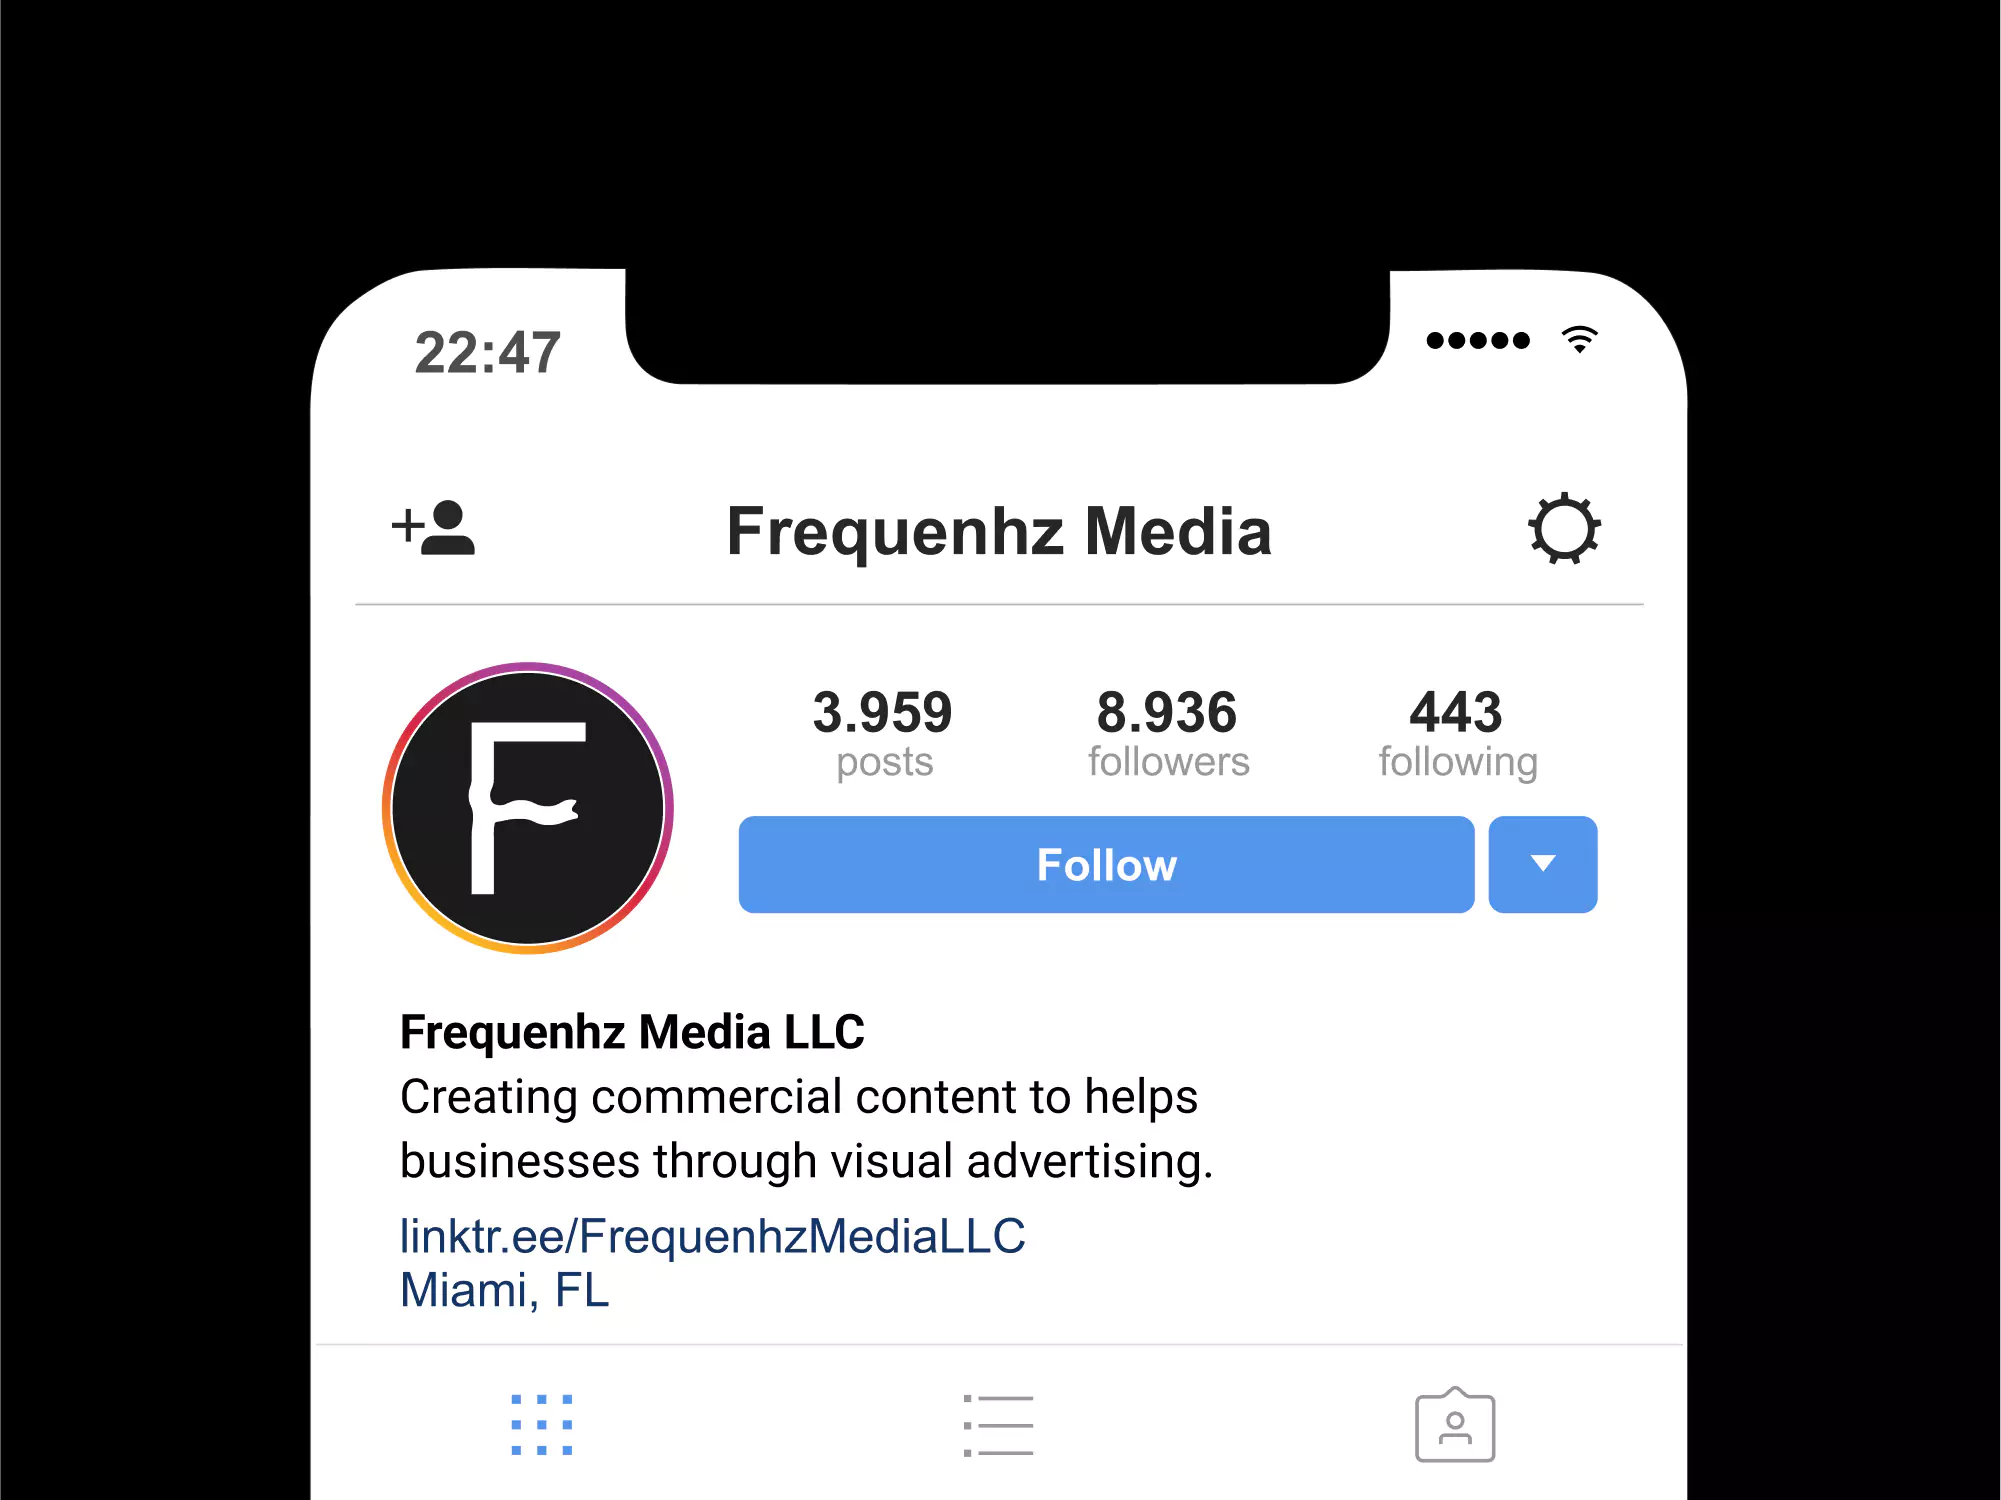 Visual Identity for Frequenhz - Instagram Profile